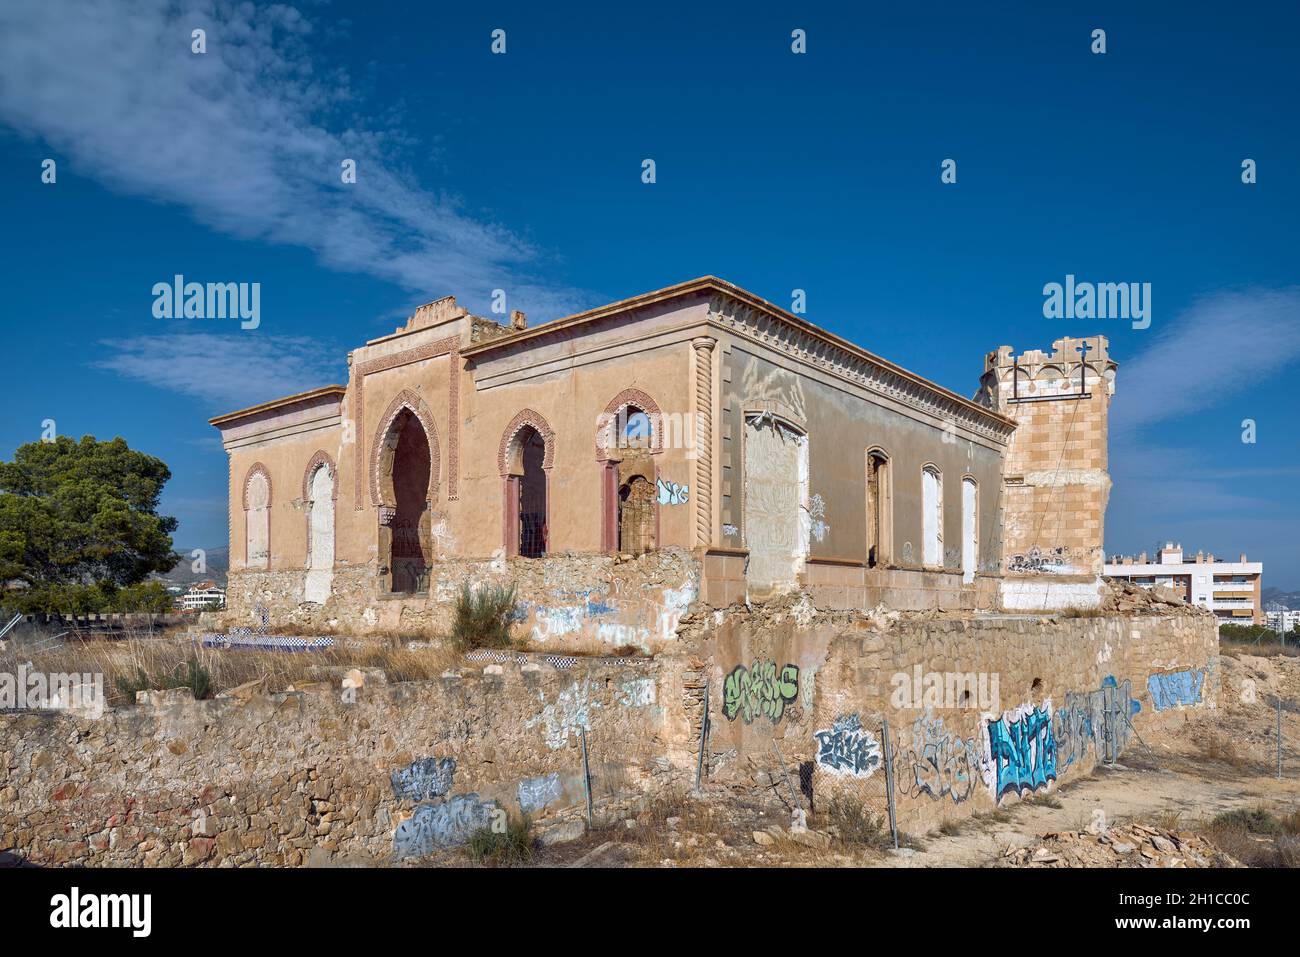 Historic ruins of Villa Giacomina, on the outskirts of the town of Villajoyosa, Costa Blanca in the province of Alicante, Spain, Europe Stock Photo